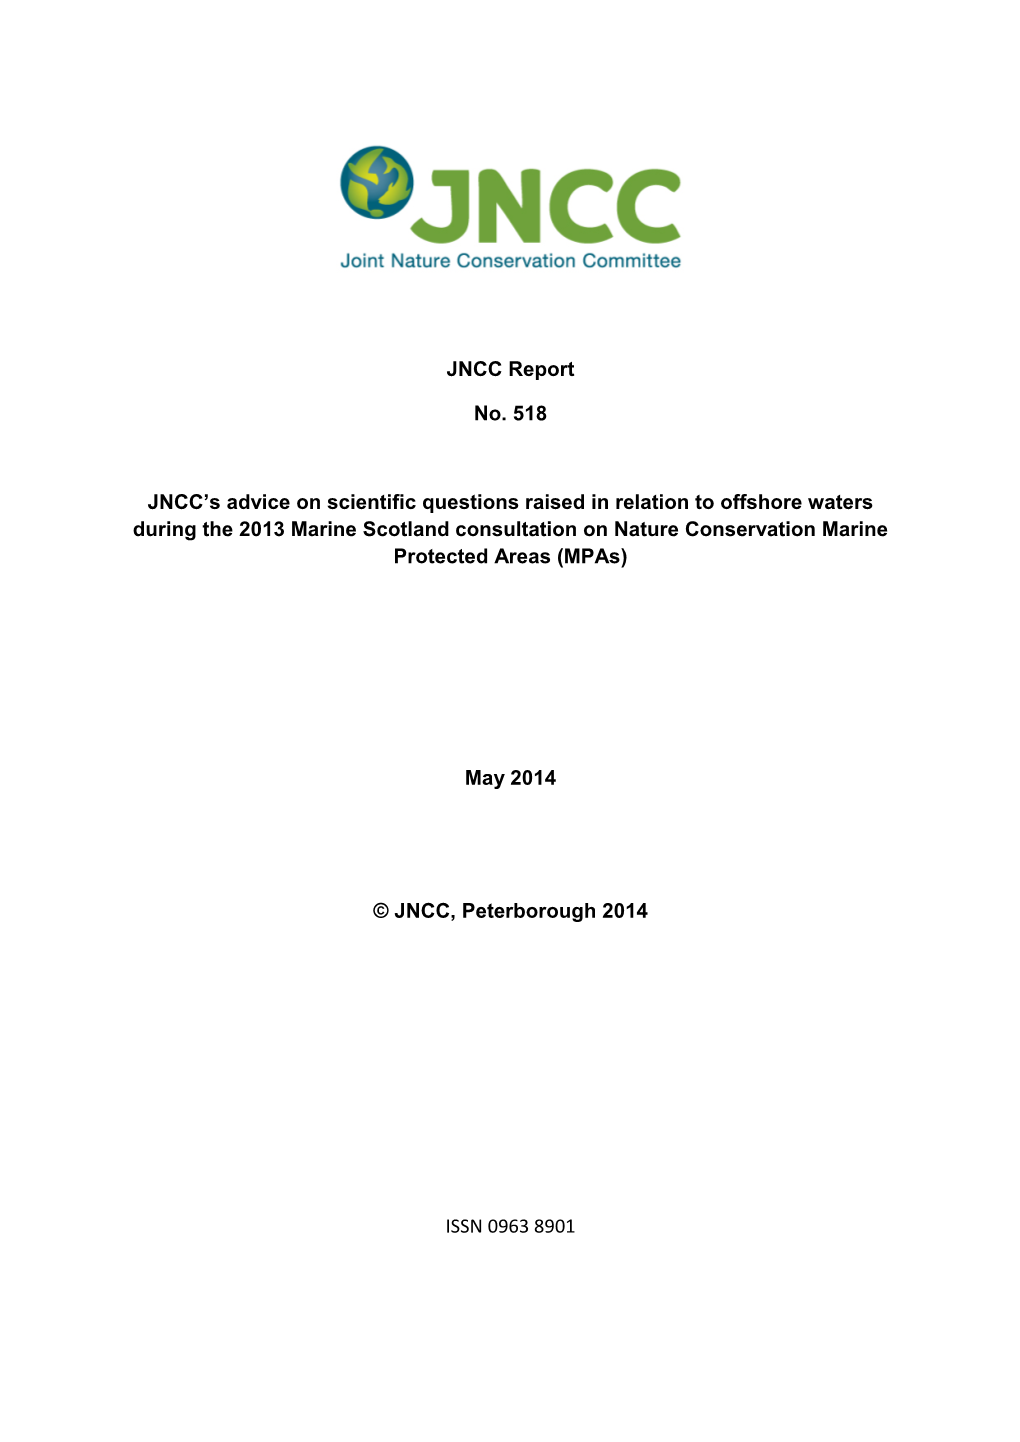 JNCC's Advice on Scientific Questions Raised in Relation to Offshore Waters